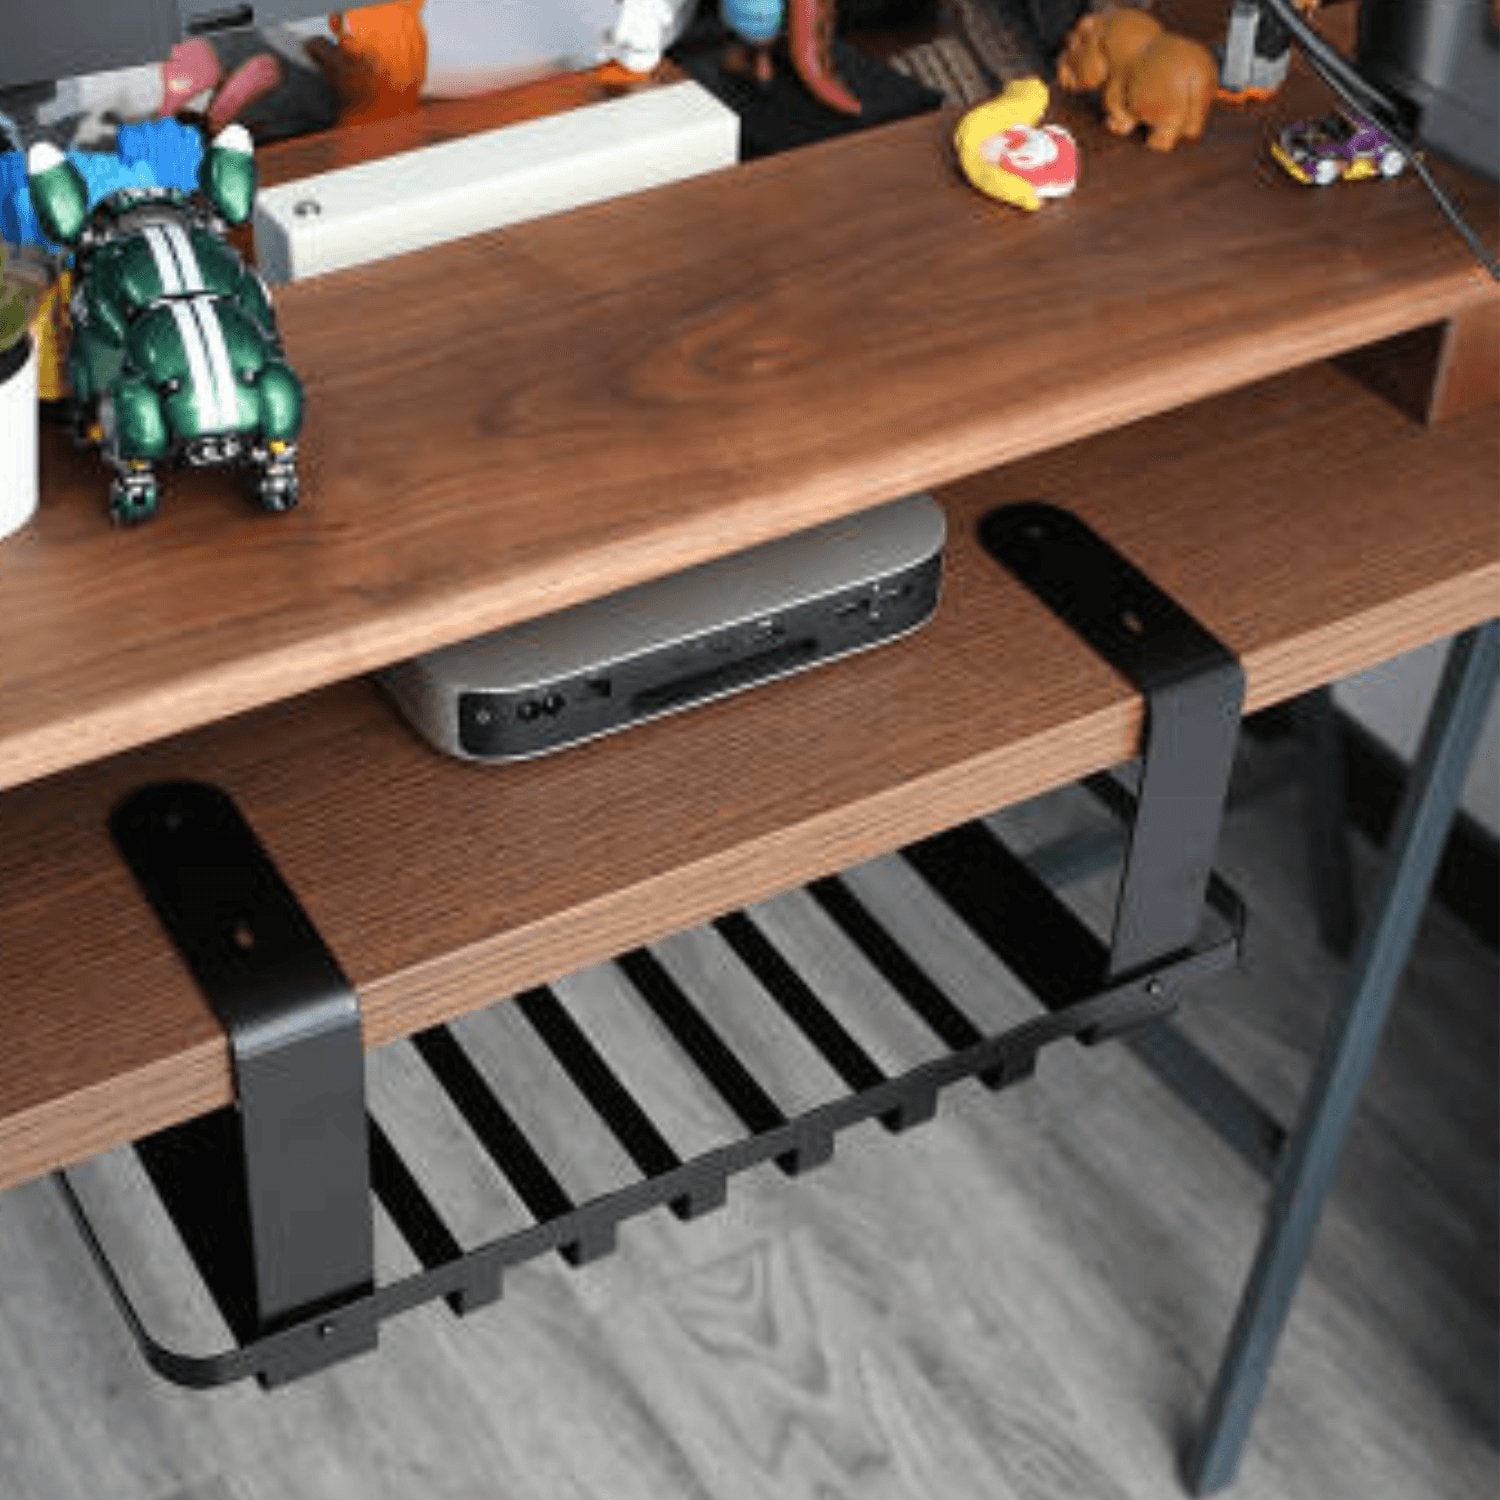 Cable Management Tray Organizer Under Desk for Office and Home No Drill/Stick Option - GADGET WAGON Desk Arm